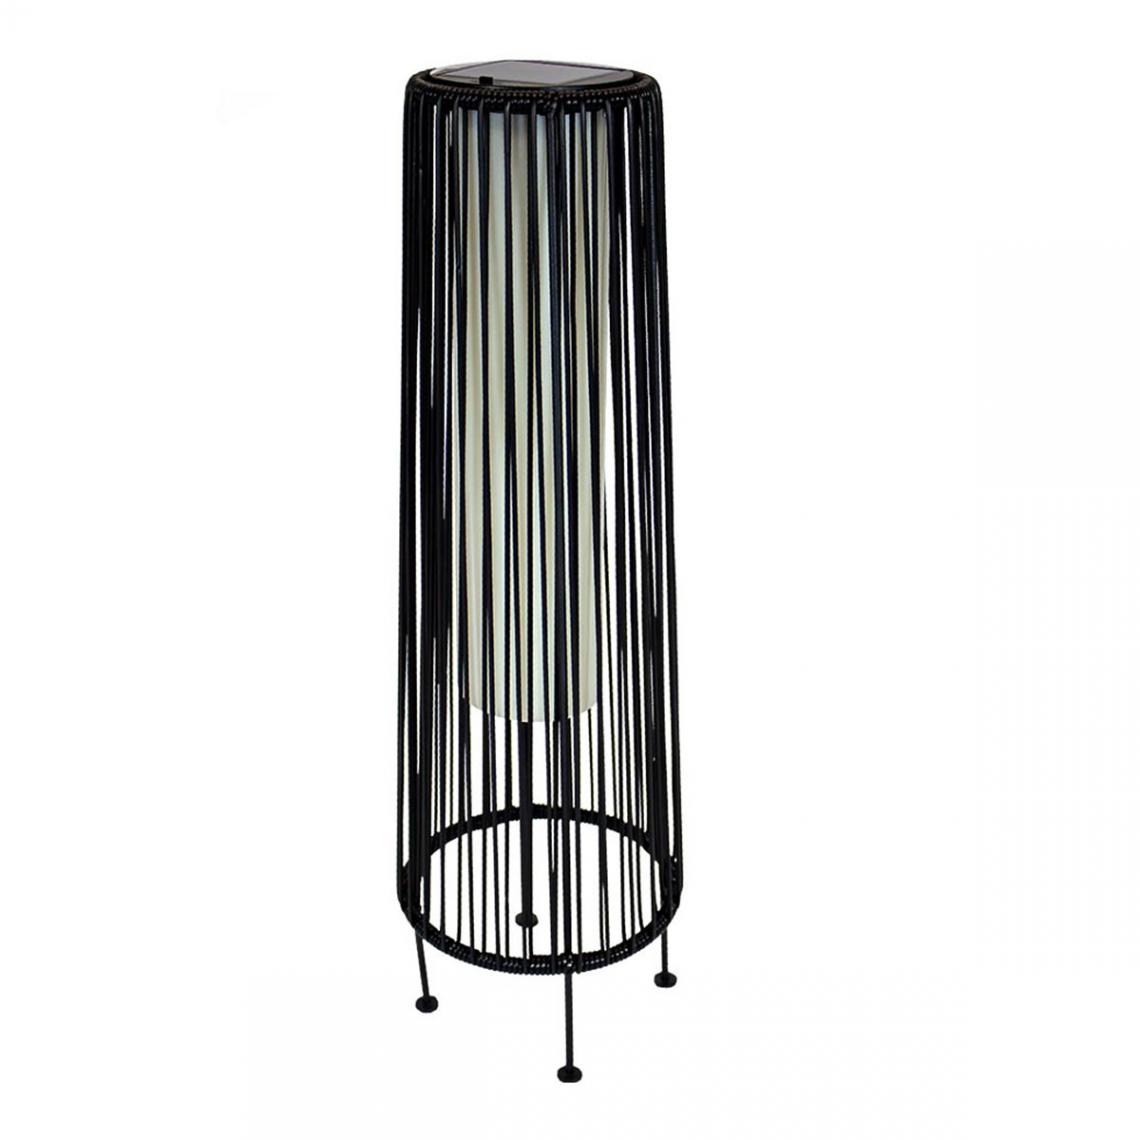 Lumisky - Lampe solaire décorative WILLY TALL noir en poly rotin H69cm - Eclairage solaire